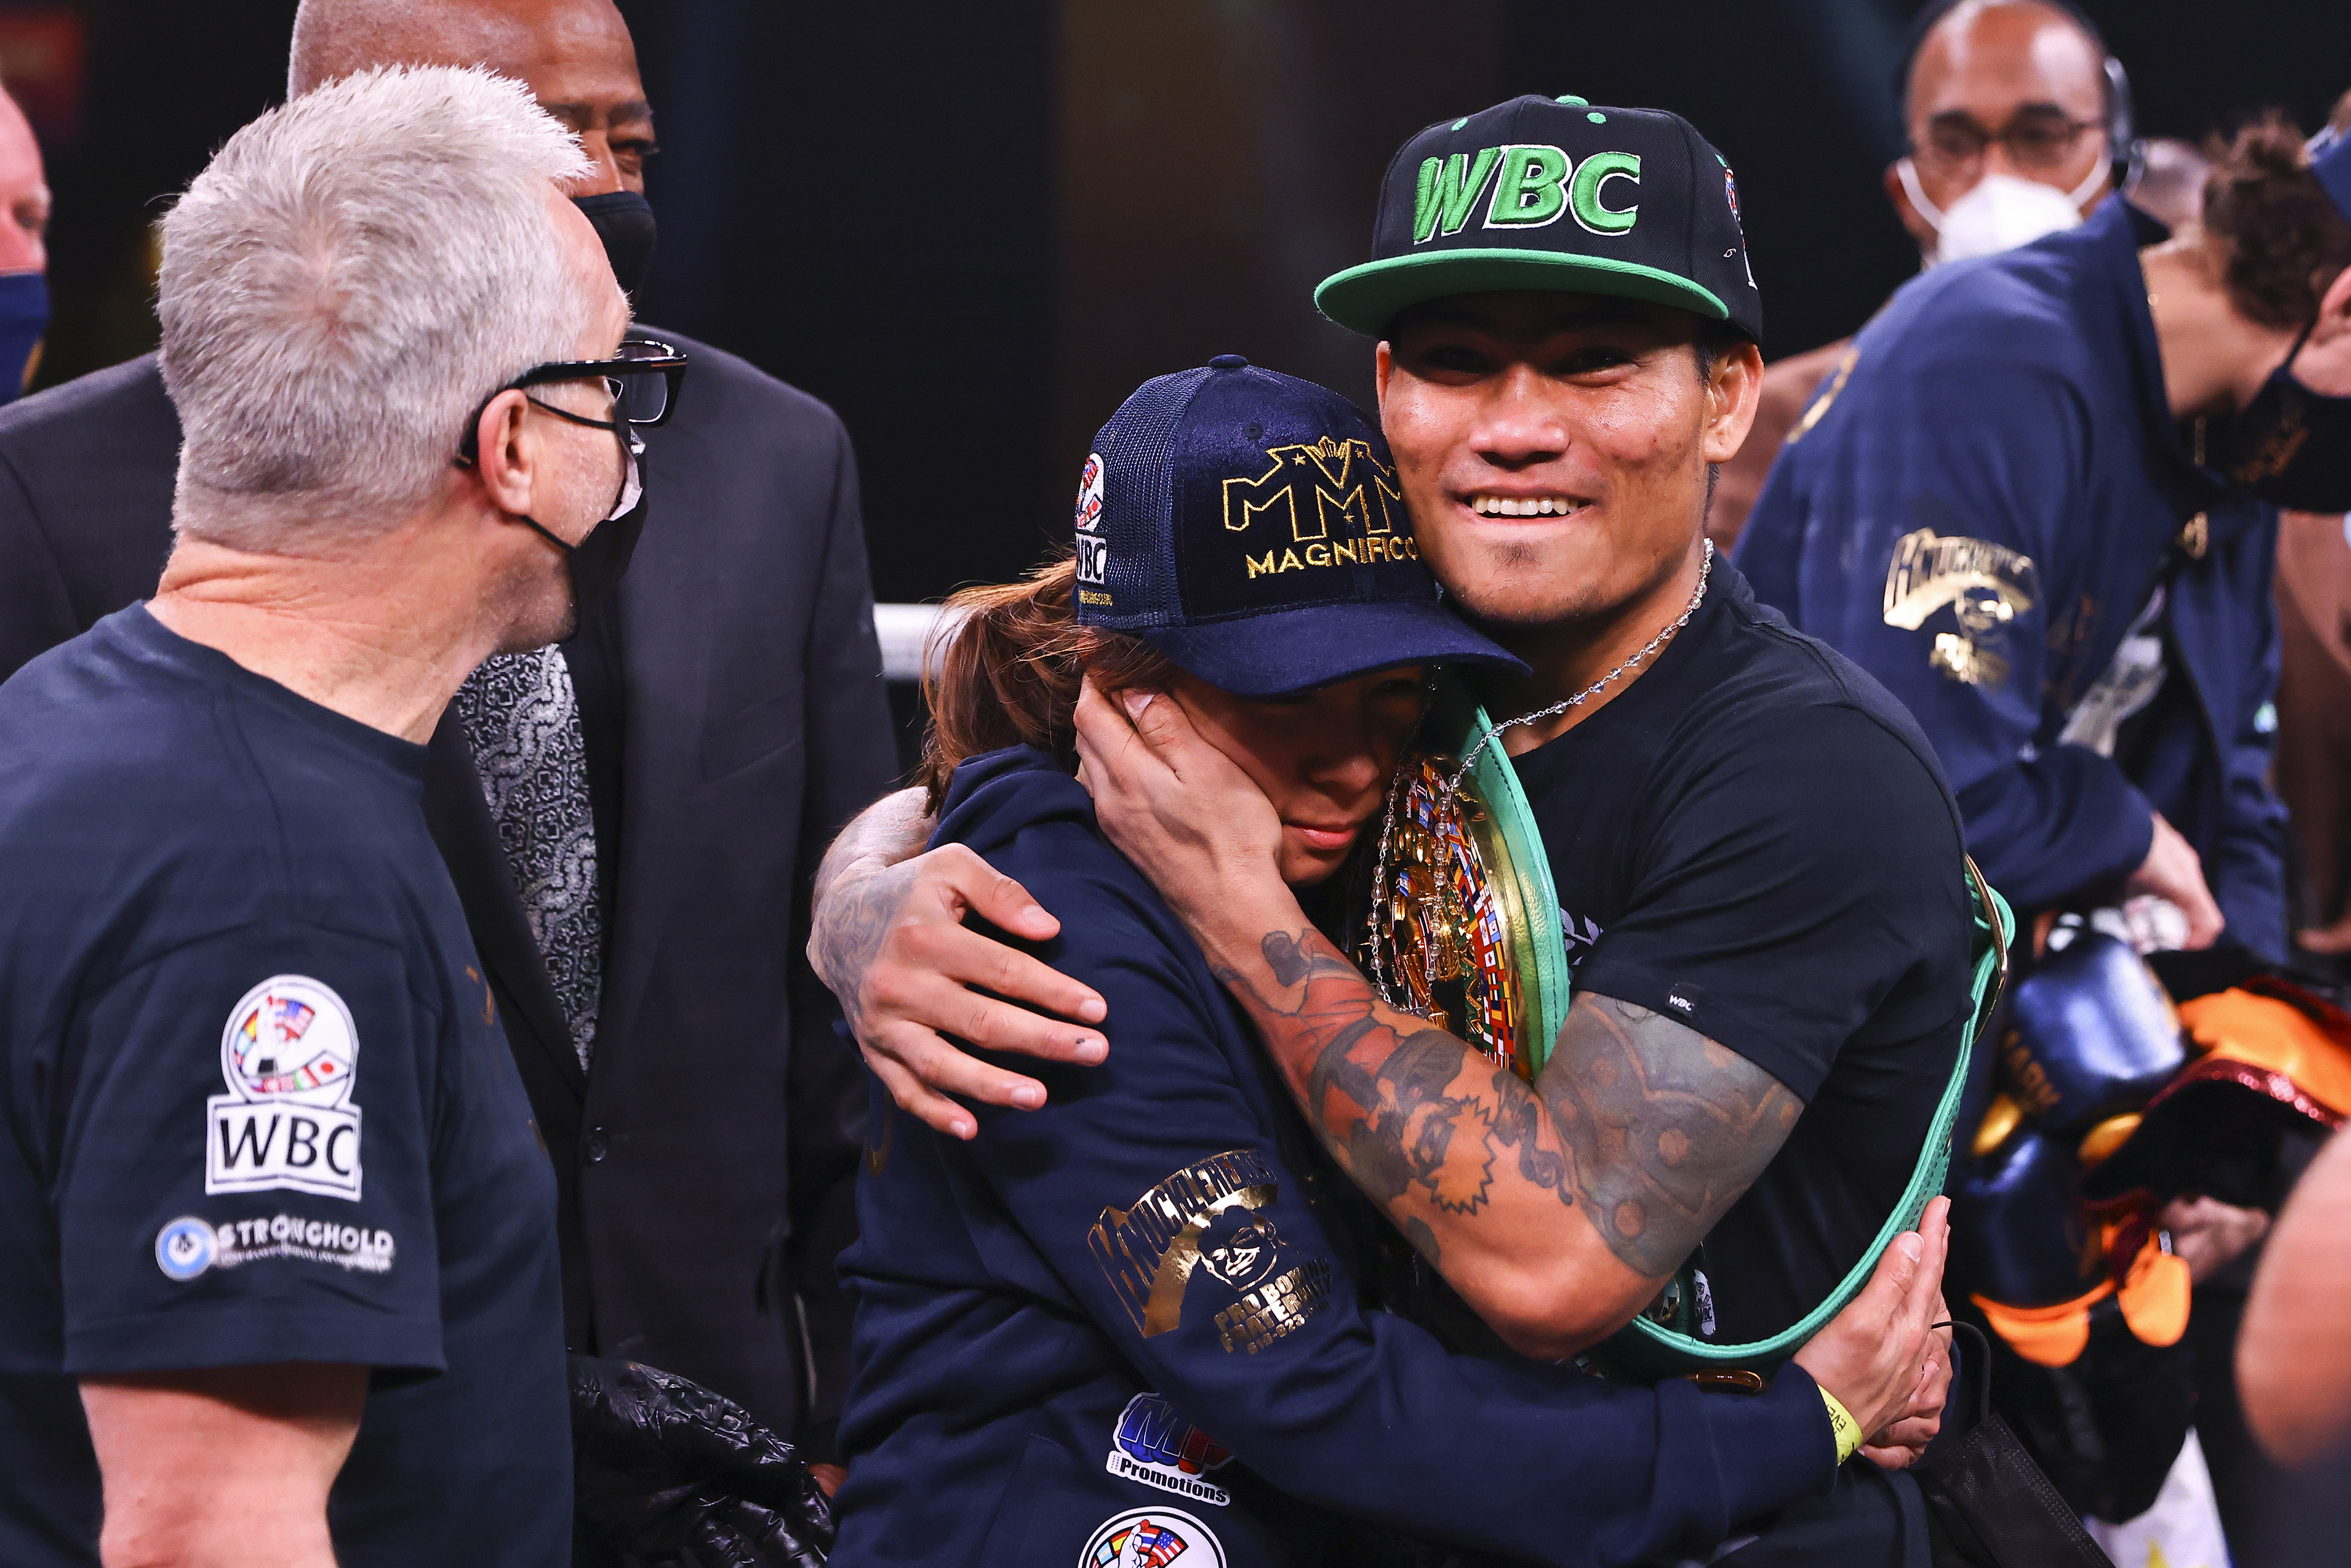 Mark Magsayo was undeniably a big winner for the week in boxing